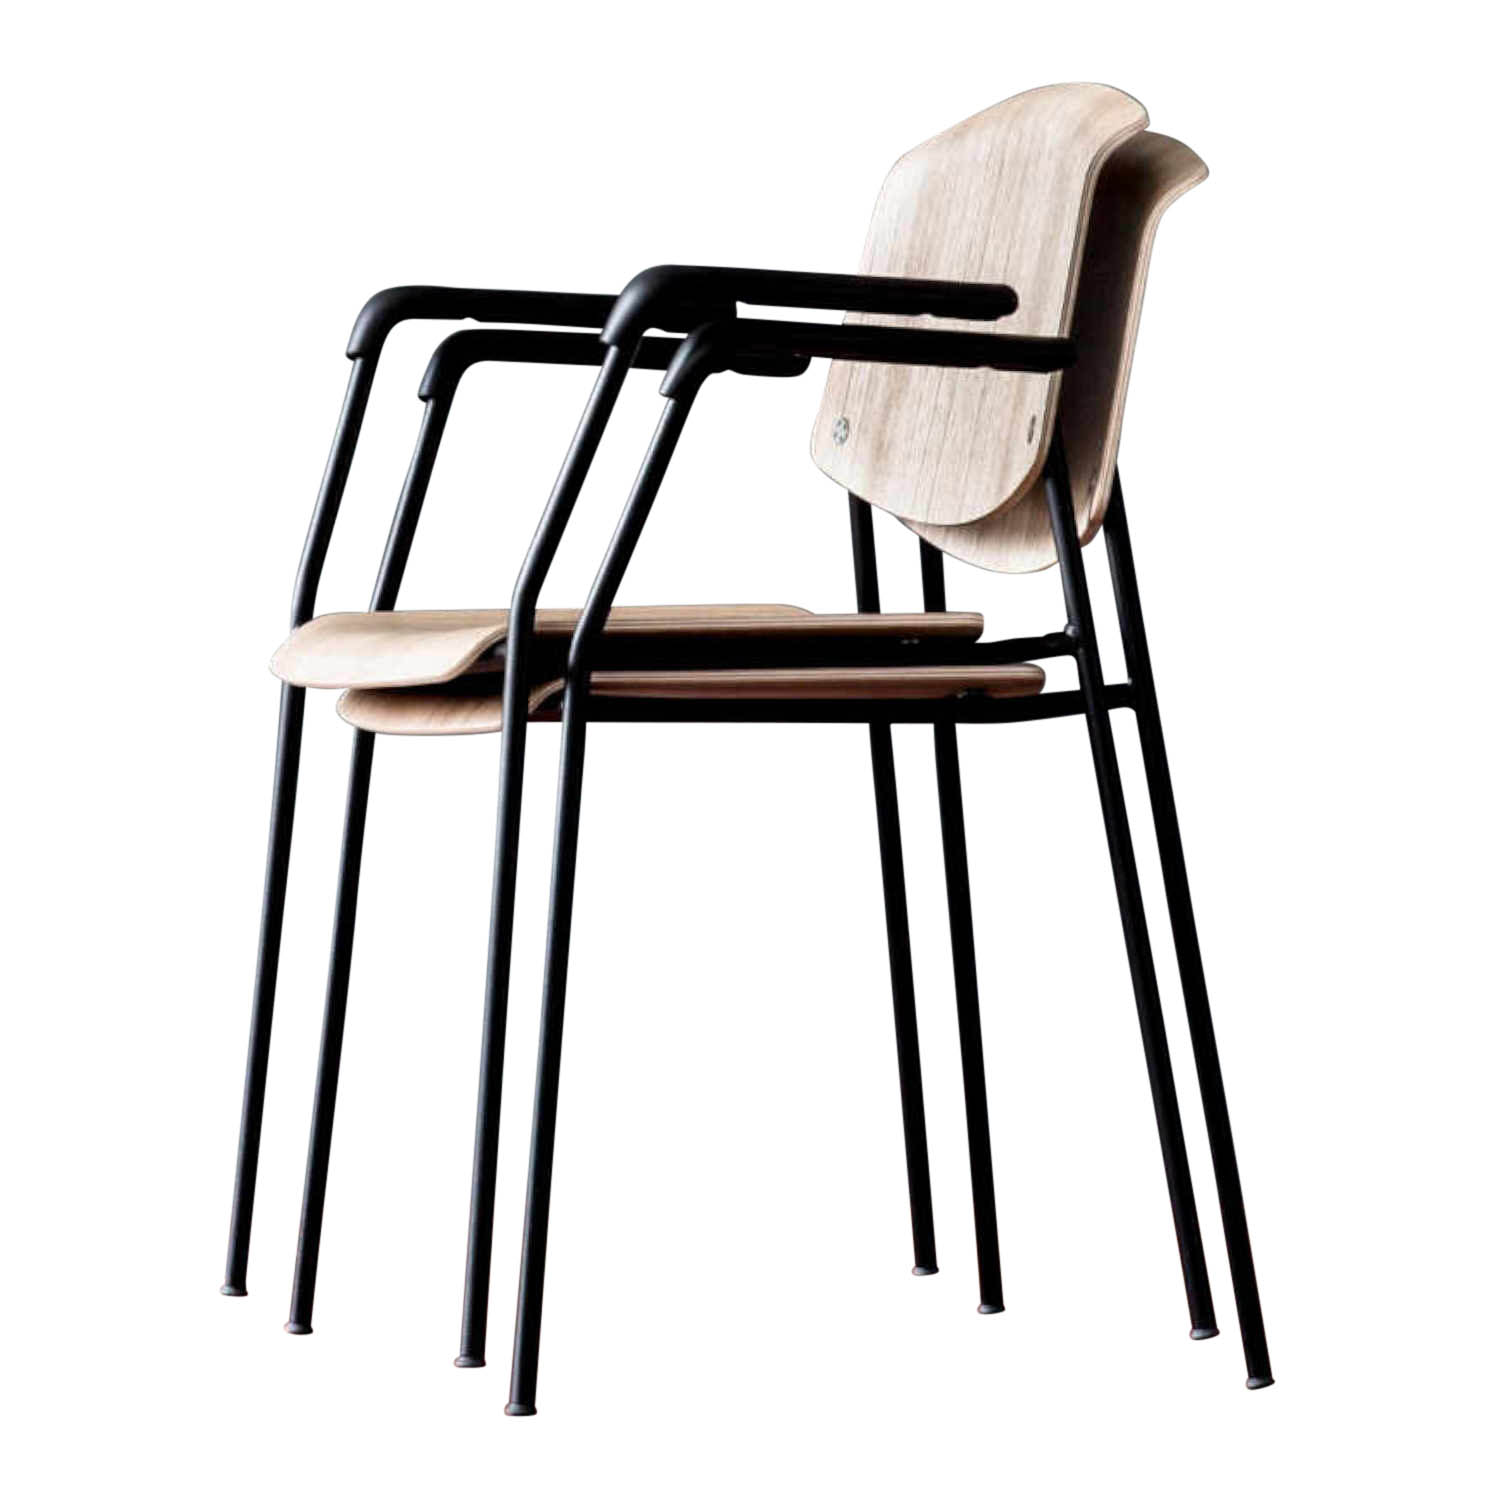 Pause Armchair Armlehnstuhl, Holz oak, black stained, Gestell tubular steel: powder lacquer in black, matt grained lacquer